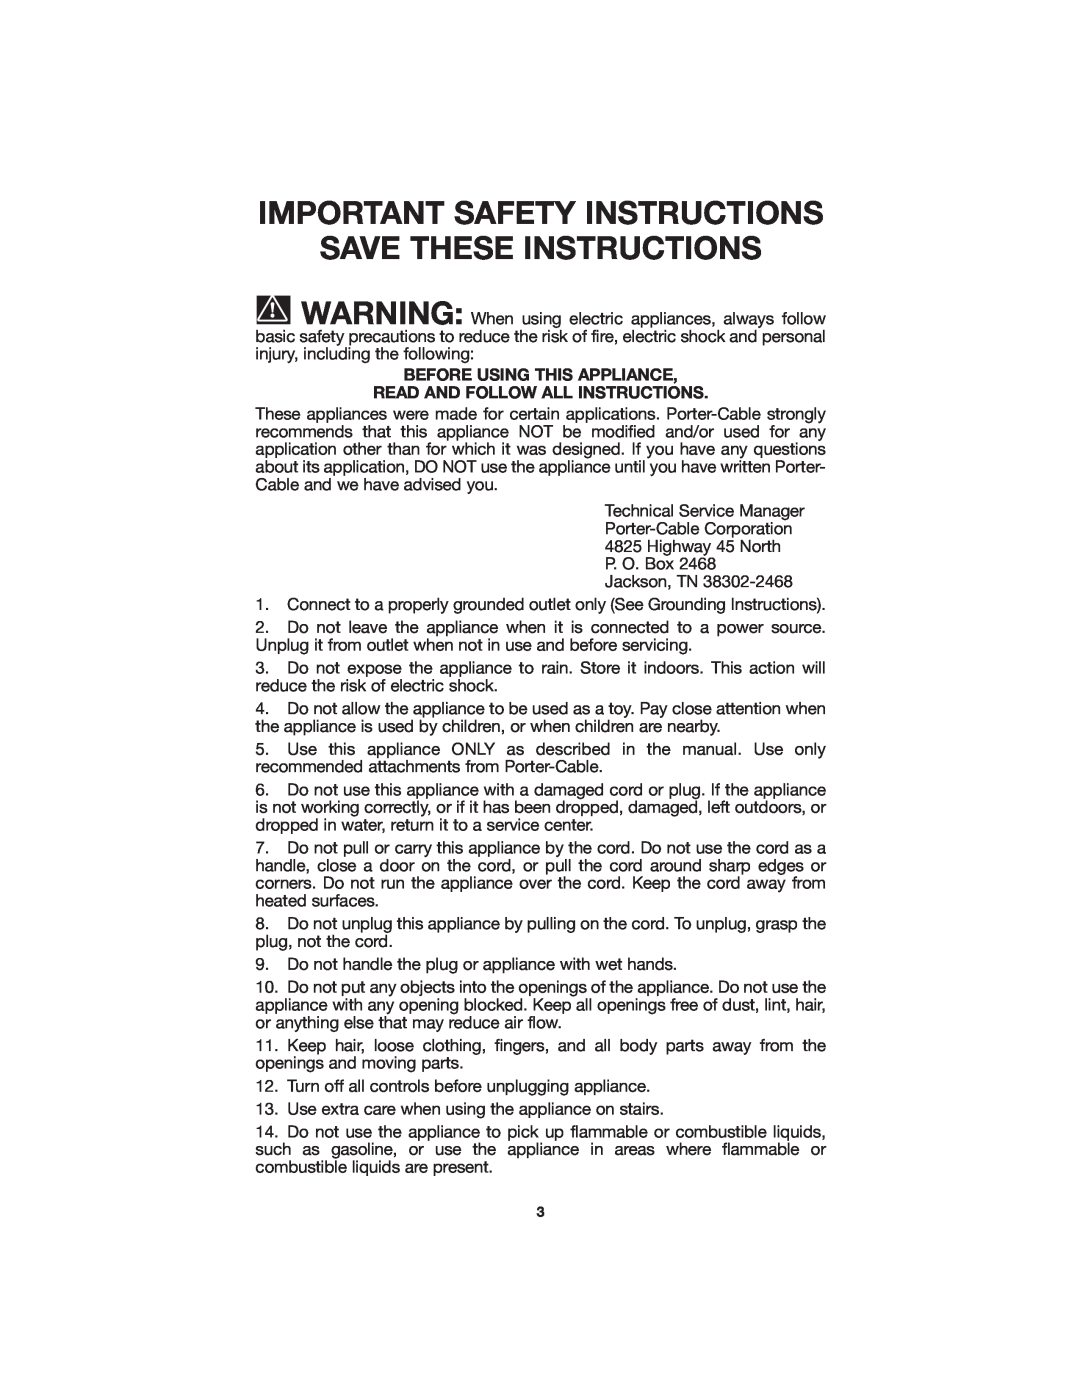 Porter-Cable 7812 instruction manual Important Safety Instructions, Save These Instructions, Before Using This Appliance 